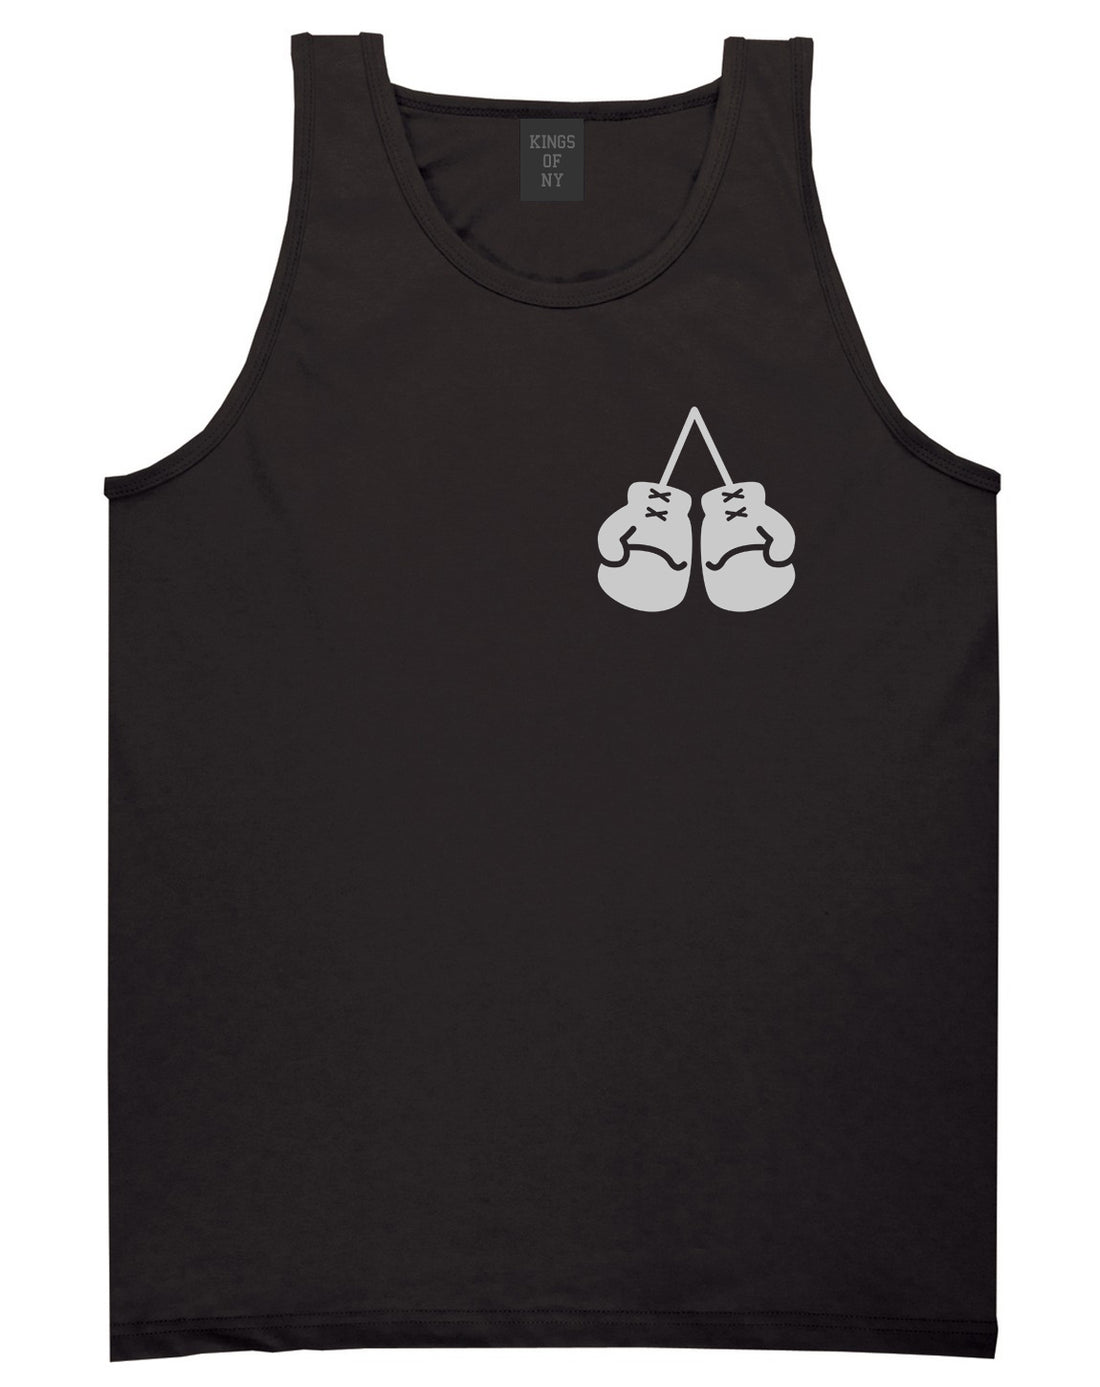 Boxing Gloves Chest Black Tank Top Shirt by Kings Of NY